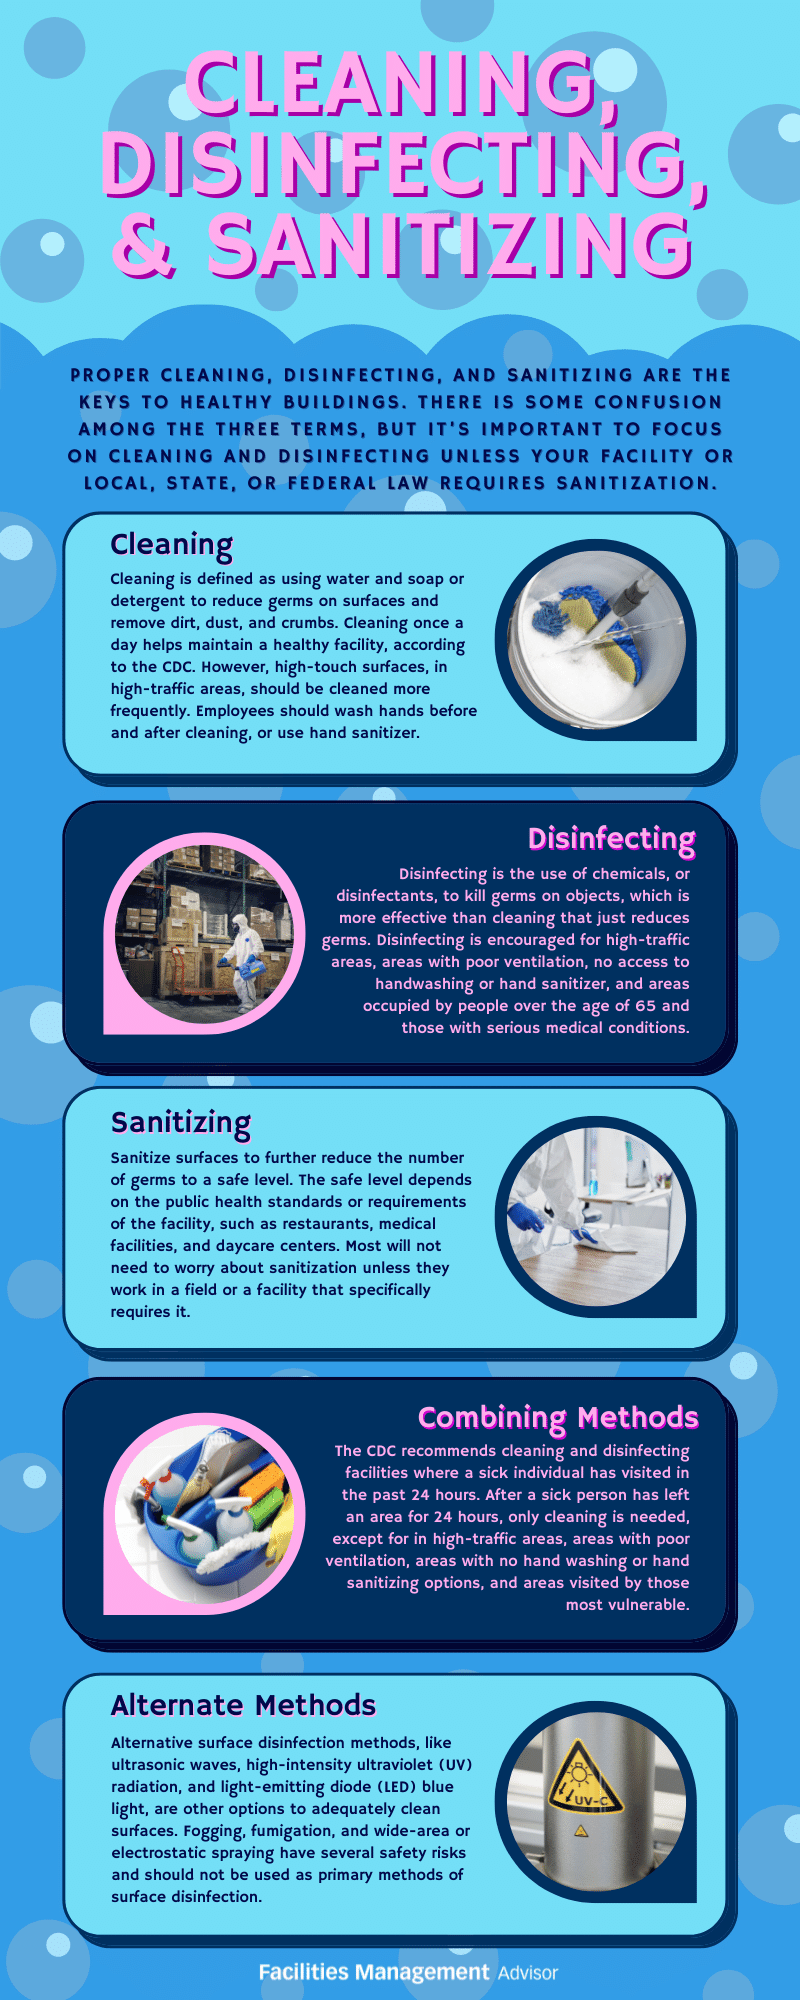 https://facilitiesmanagementadvisor.blr.com/app/uploads/sites/8/2022/08/FM-Version-of-the-Cleaning-Disinfecting-Sanitizing-Infographic.png